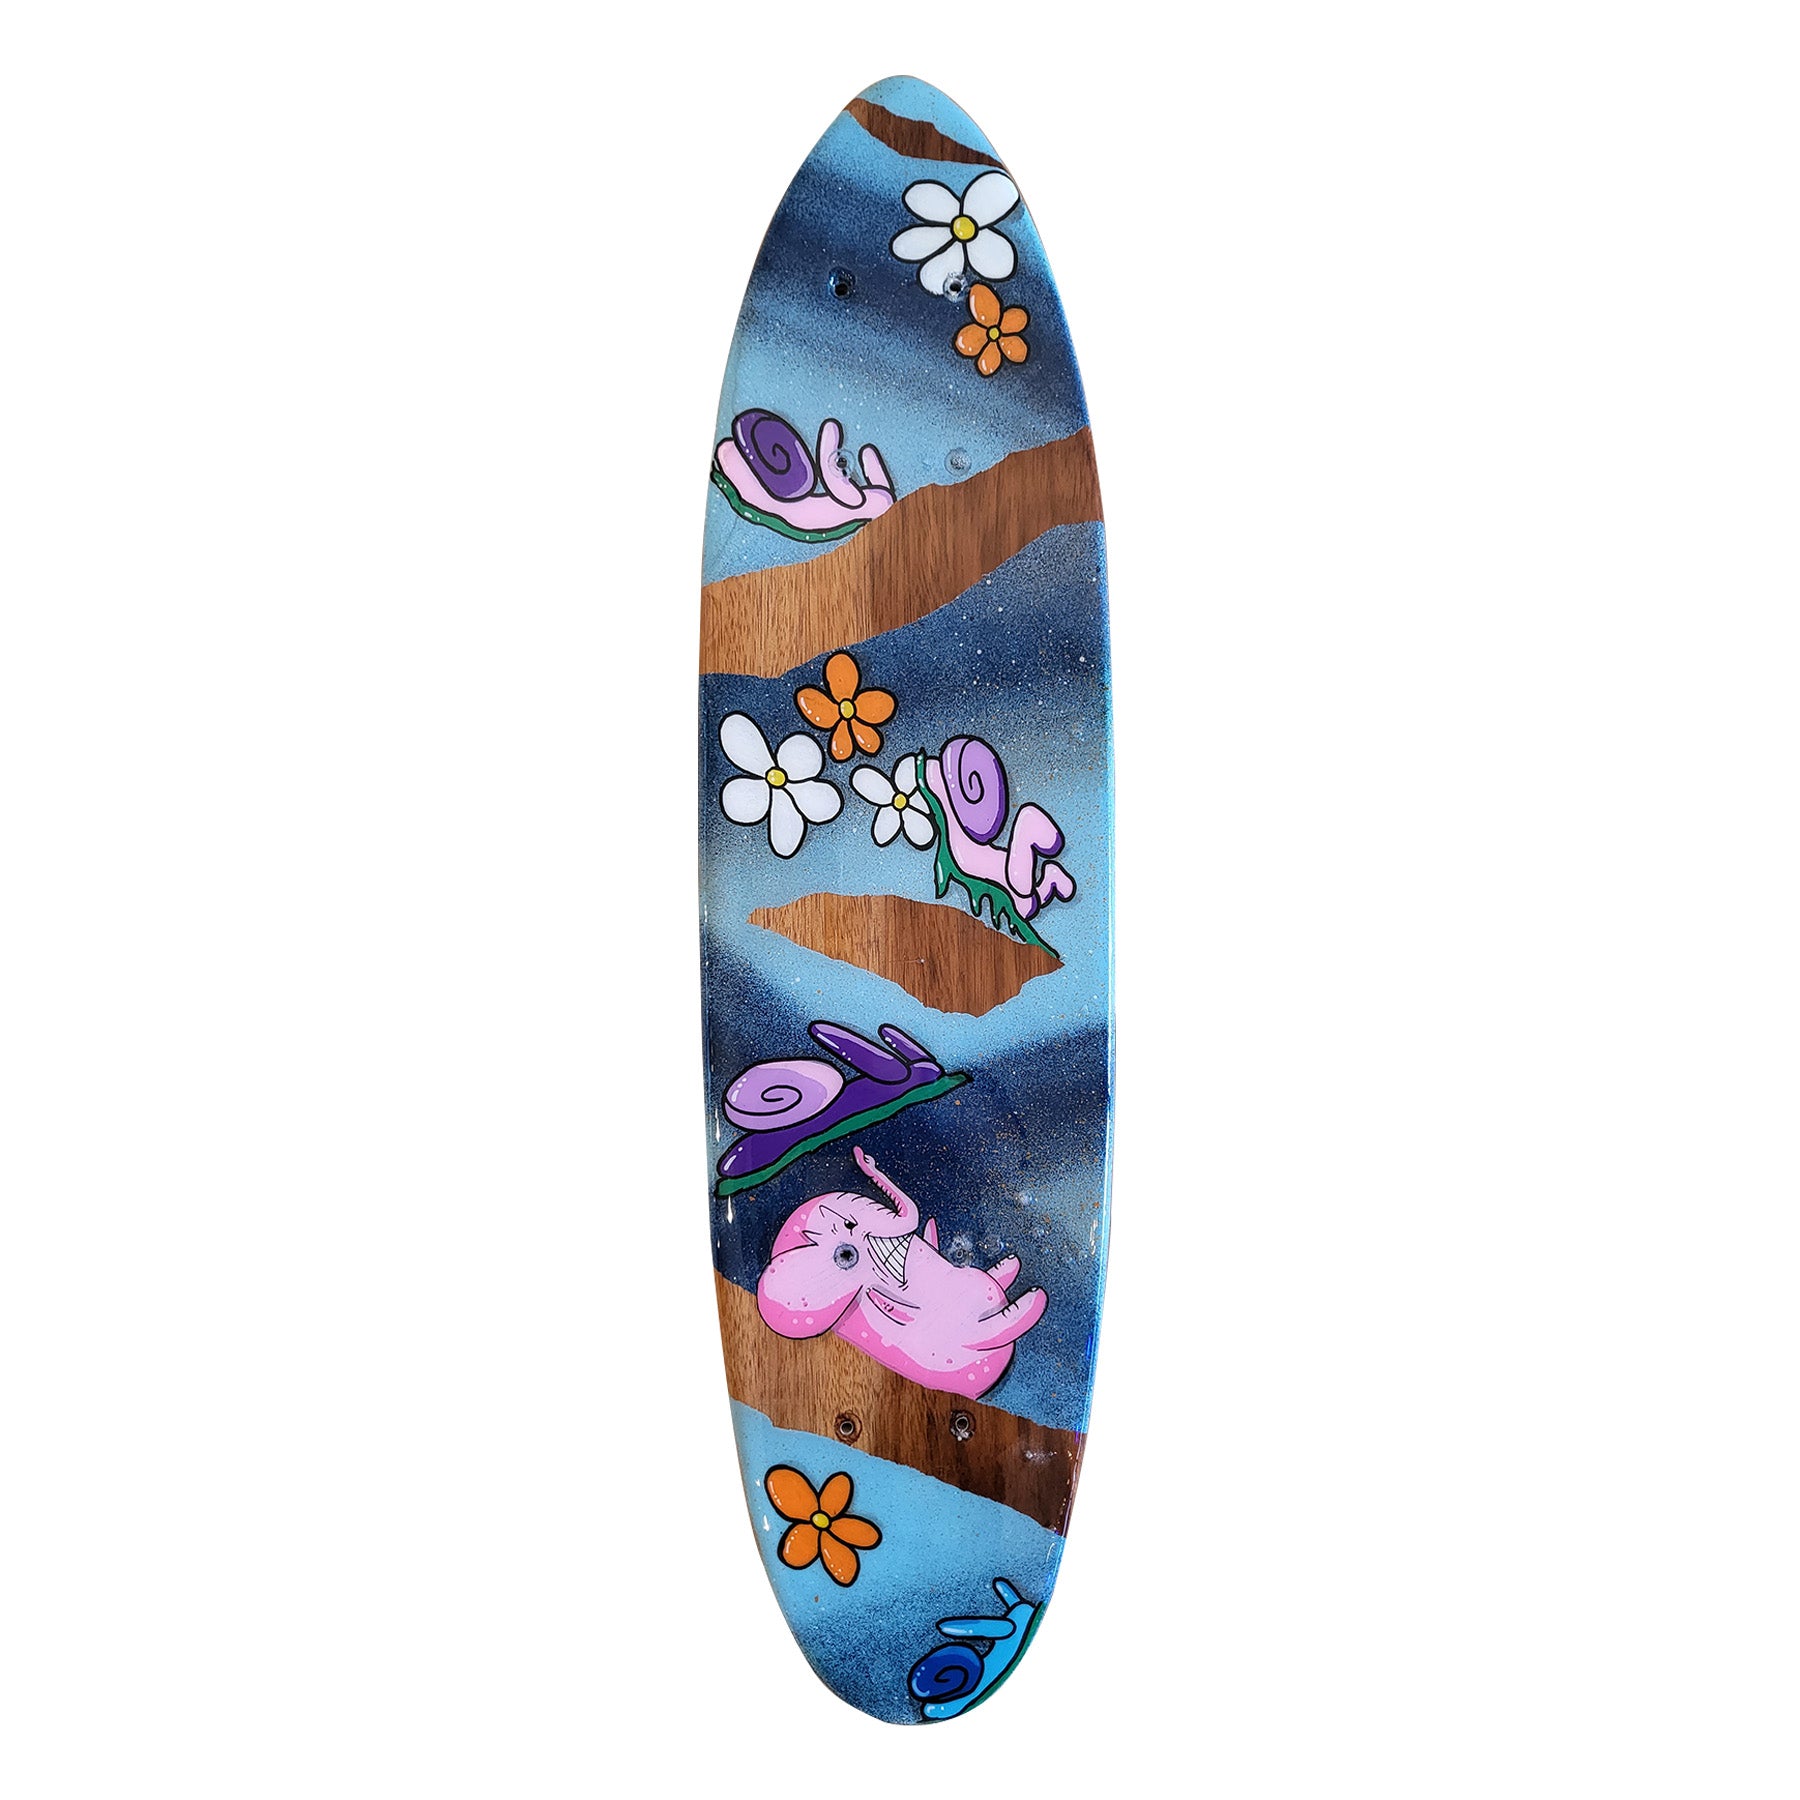 Skateboard deck painted in layers of blue from top to bottom with some wood grain showing, white and orange flowers, purple and pink snails and a pink elephant at the bottom